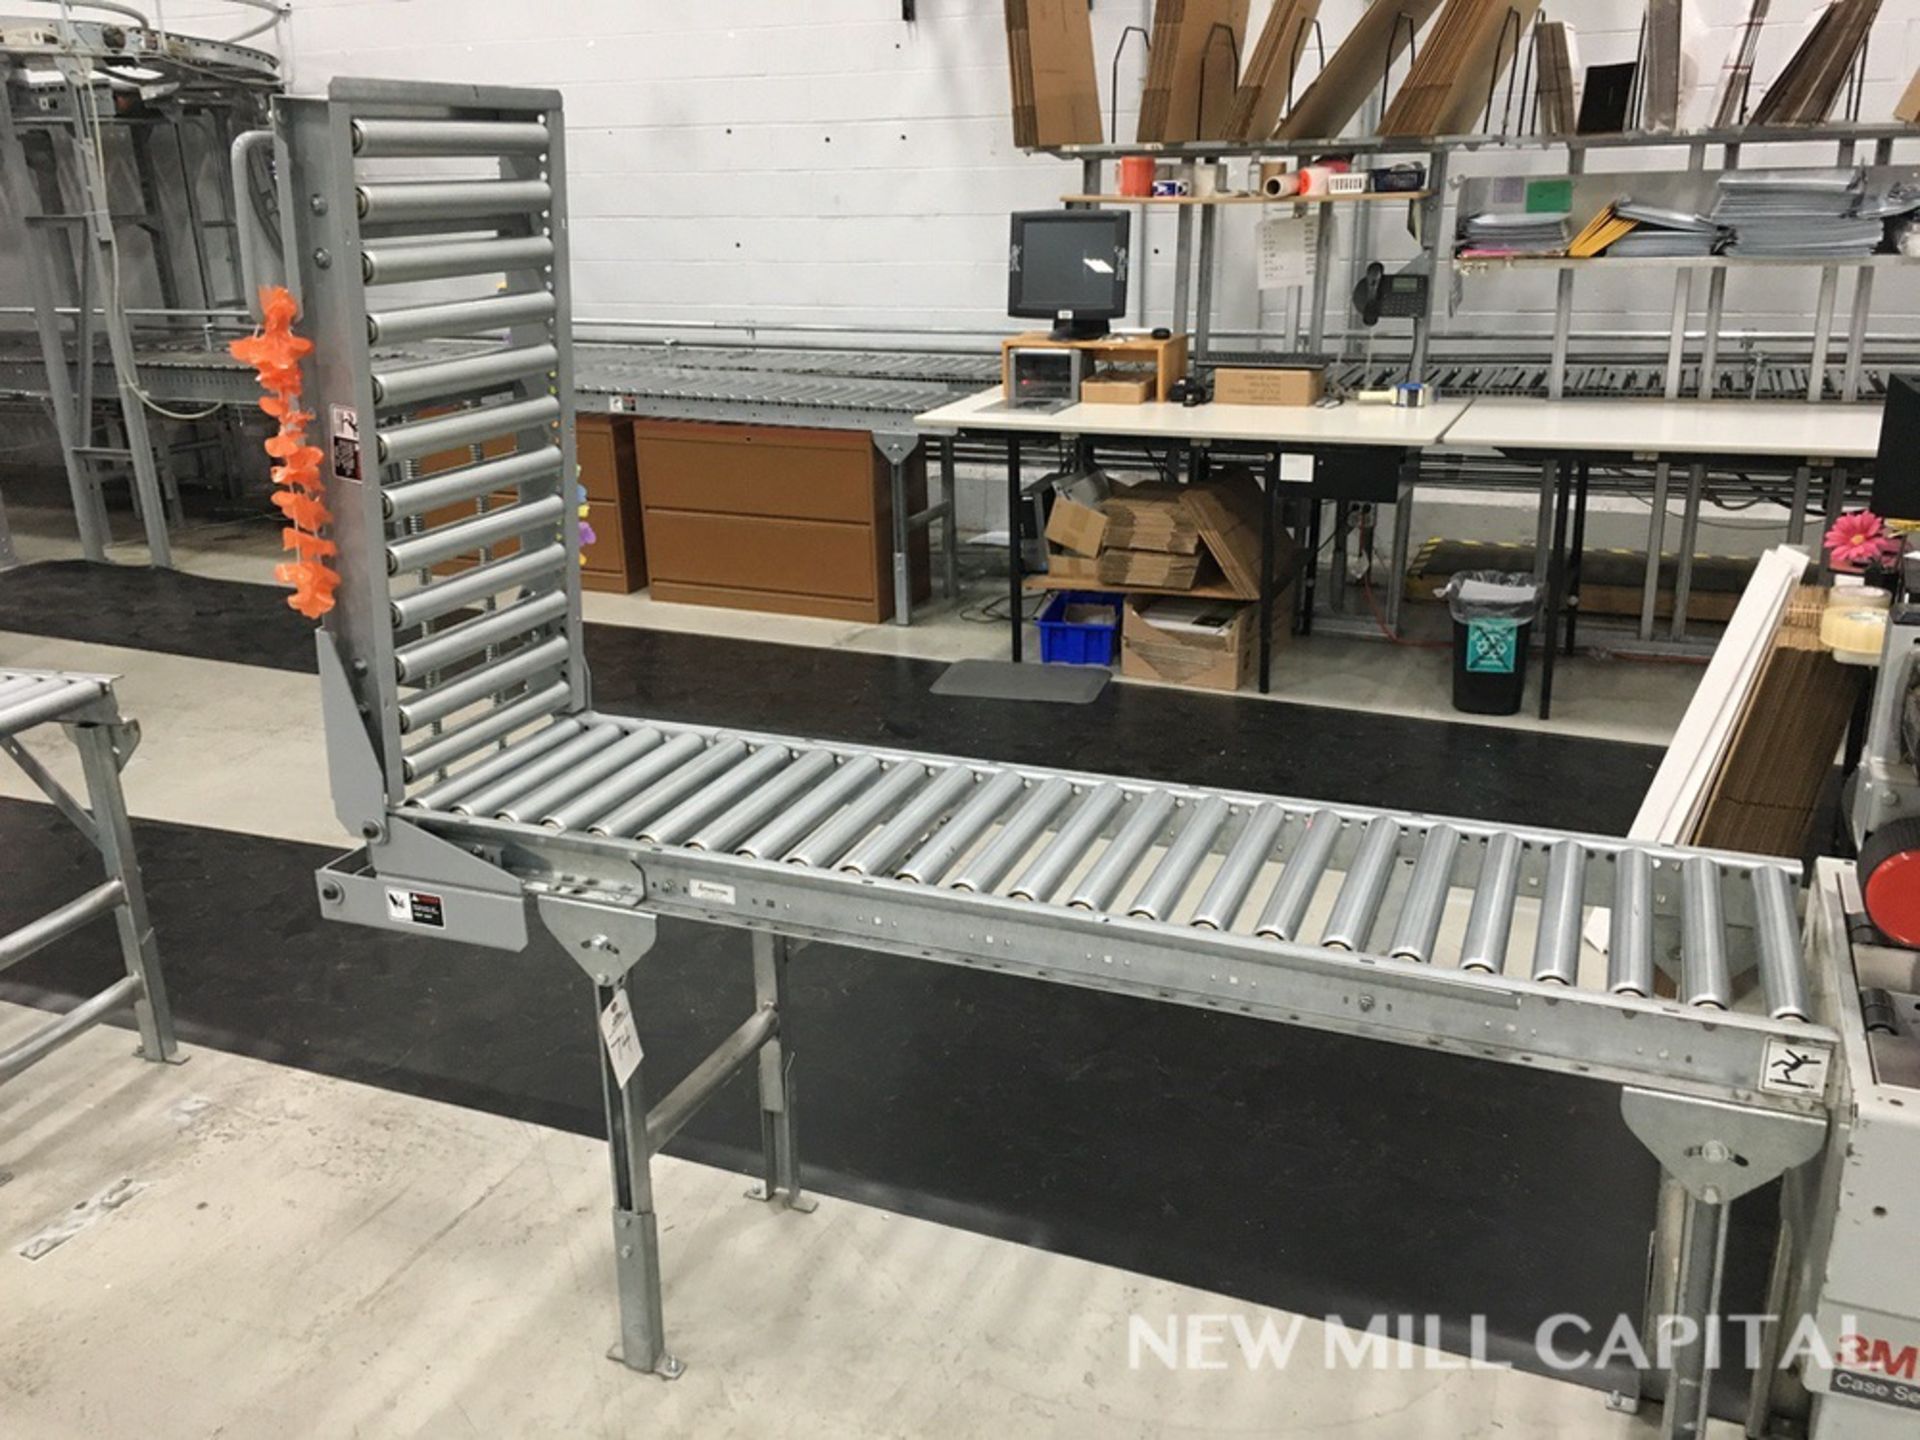 (1) Spring Assisted Roller Conveyor Gate and Conveyor - Approx 9ft OAL, (1) 5ft | Rig Fee: $150